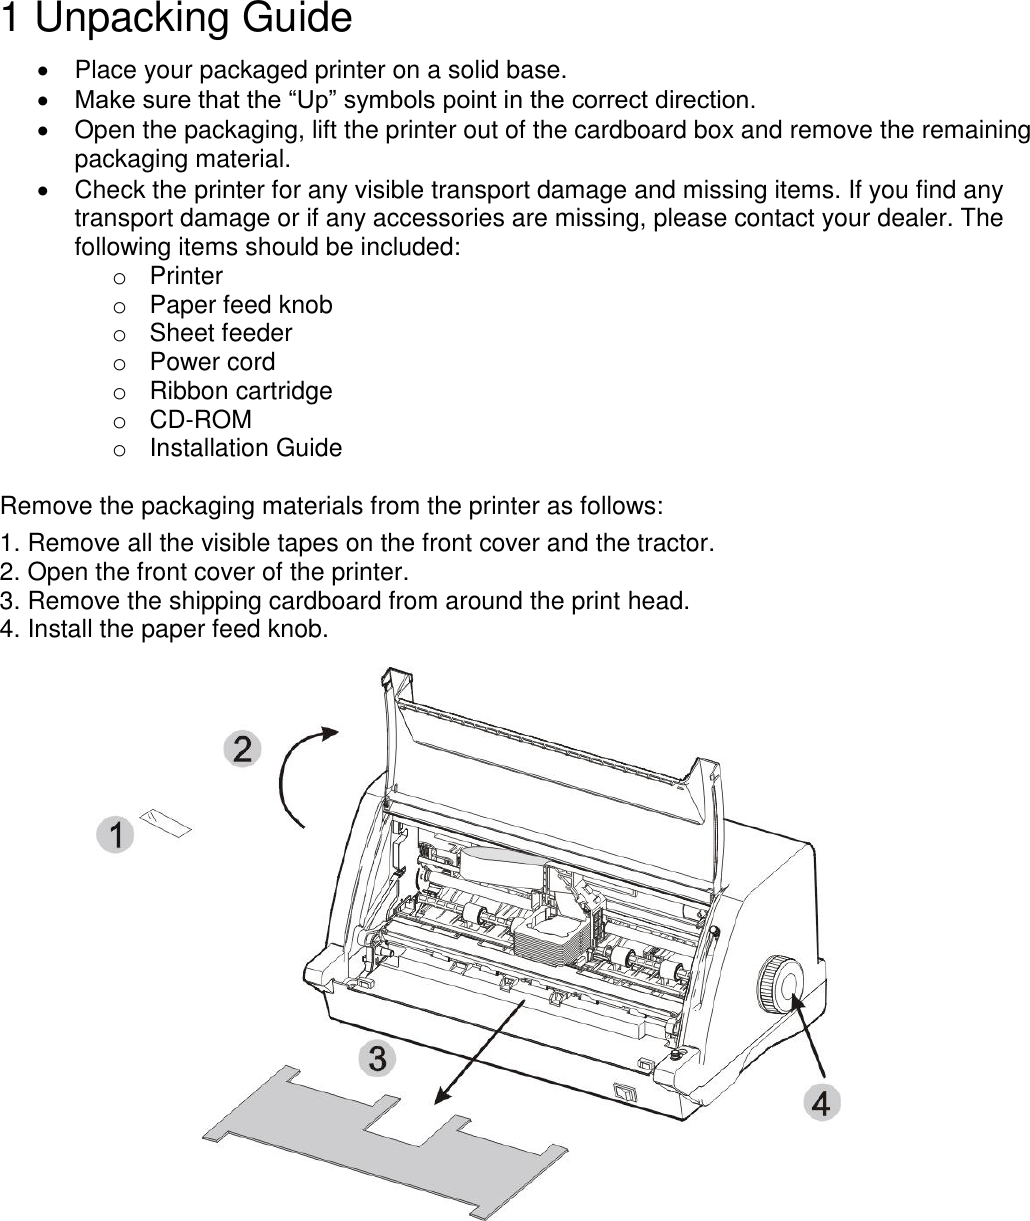    1 Unpacking Guide    Place your packaged printer on a solid base.  Make sure that the “Up” symbols point in the correct direction.   Open the packaging, lift the printer out of the cardboard box and remove the remaining packaging material.   Check the printer for any visible transport damage and missing items. If you find any transport damage or if any accessories are missing, please contact your dealer. The following items should be included: o  Printer o  Paper feed knob o  Sheet feeder o  Power cord o  Ribbon cartridge o CD-ROM o  Installation Guide  Remove the packaging materials from the printer as follows: 1. Remove all the visible tapes on the front cover and the tractor. 2. Open the front cover of the printer. 3. Remove the shipping cardboard from around the print head. 4. Install the paper feed knob.   